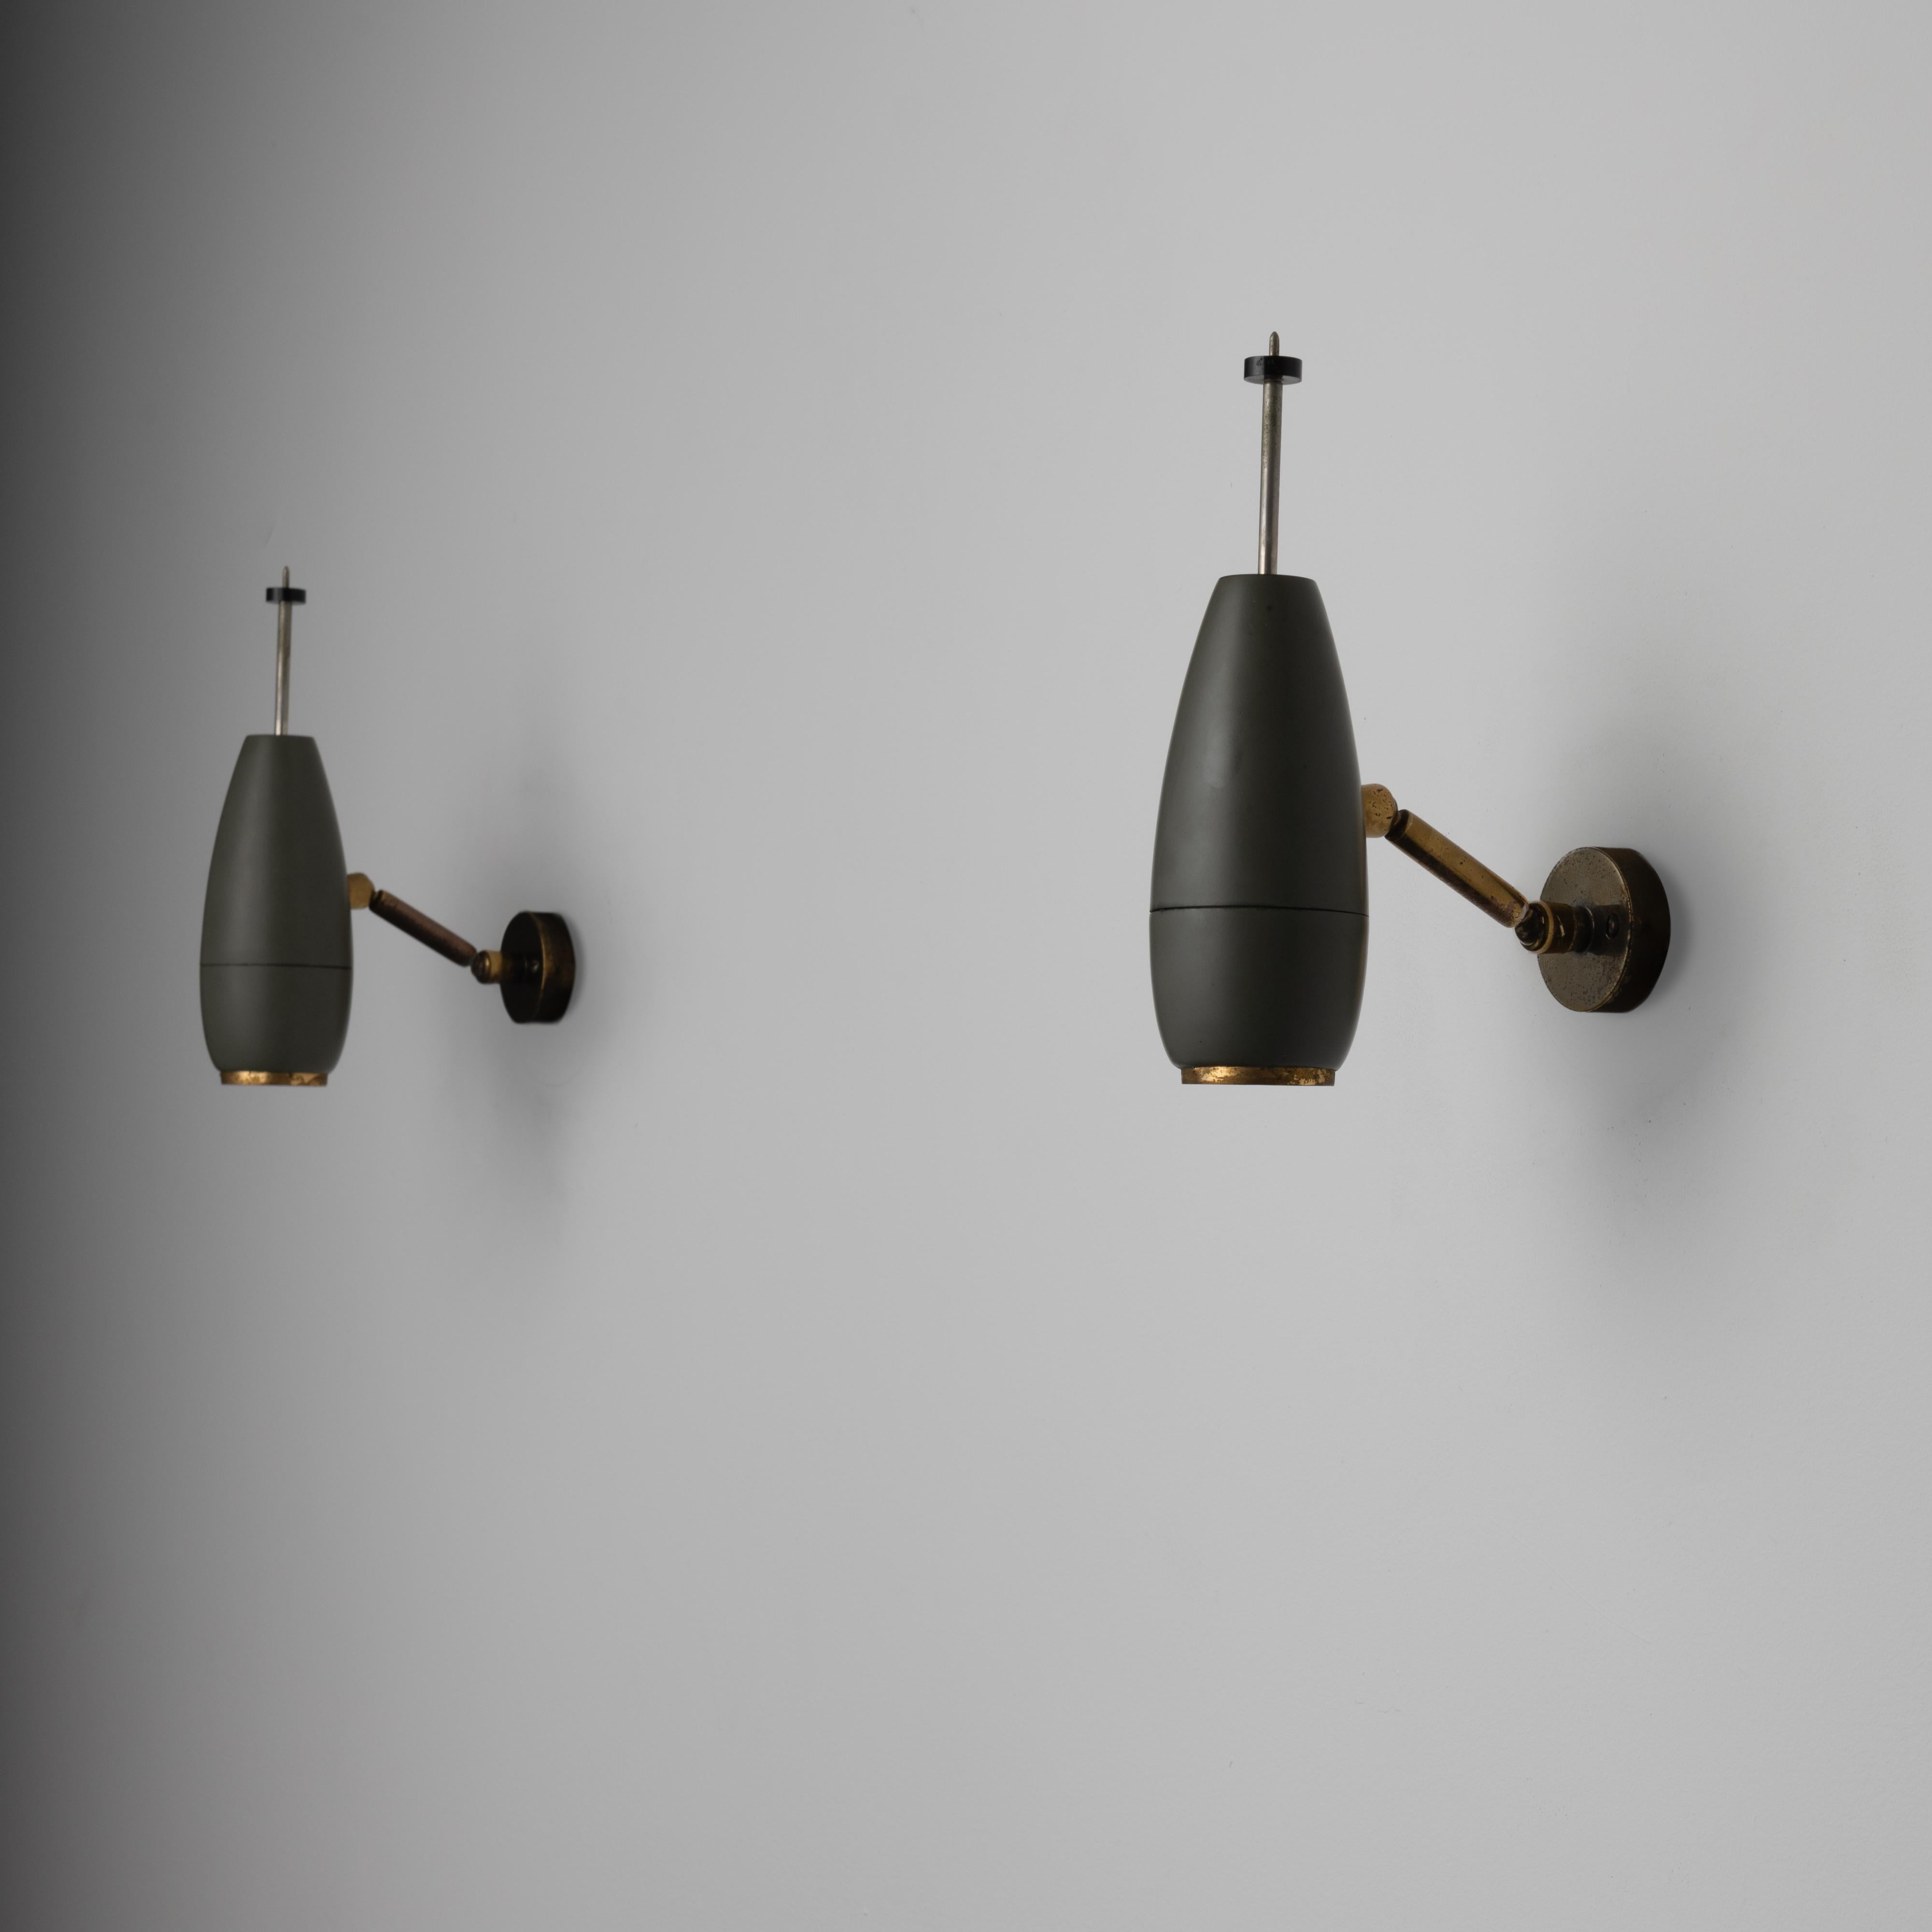 Model 577 Sconce by Oscar Torlasco for Lumi. Designed and manufactured in Italy, in 1961. Industrial and anatomical wall sconces with enameled torpedo body and adjustable diffusion intensity from rear end stem. These sconces each hold one E14